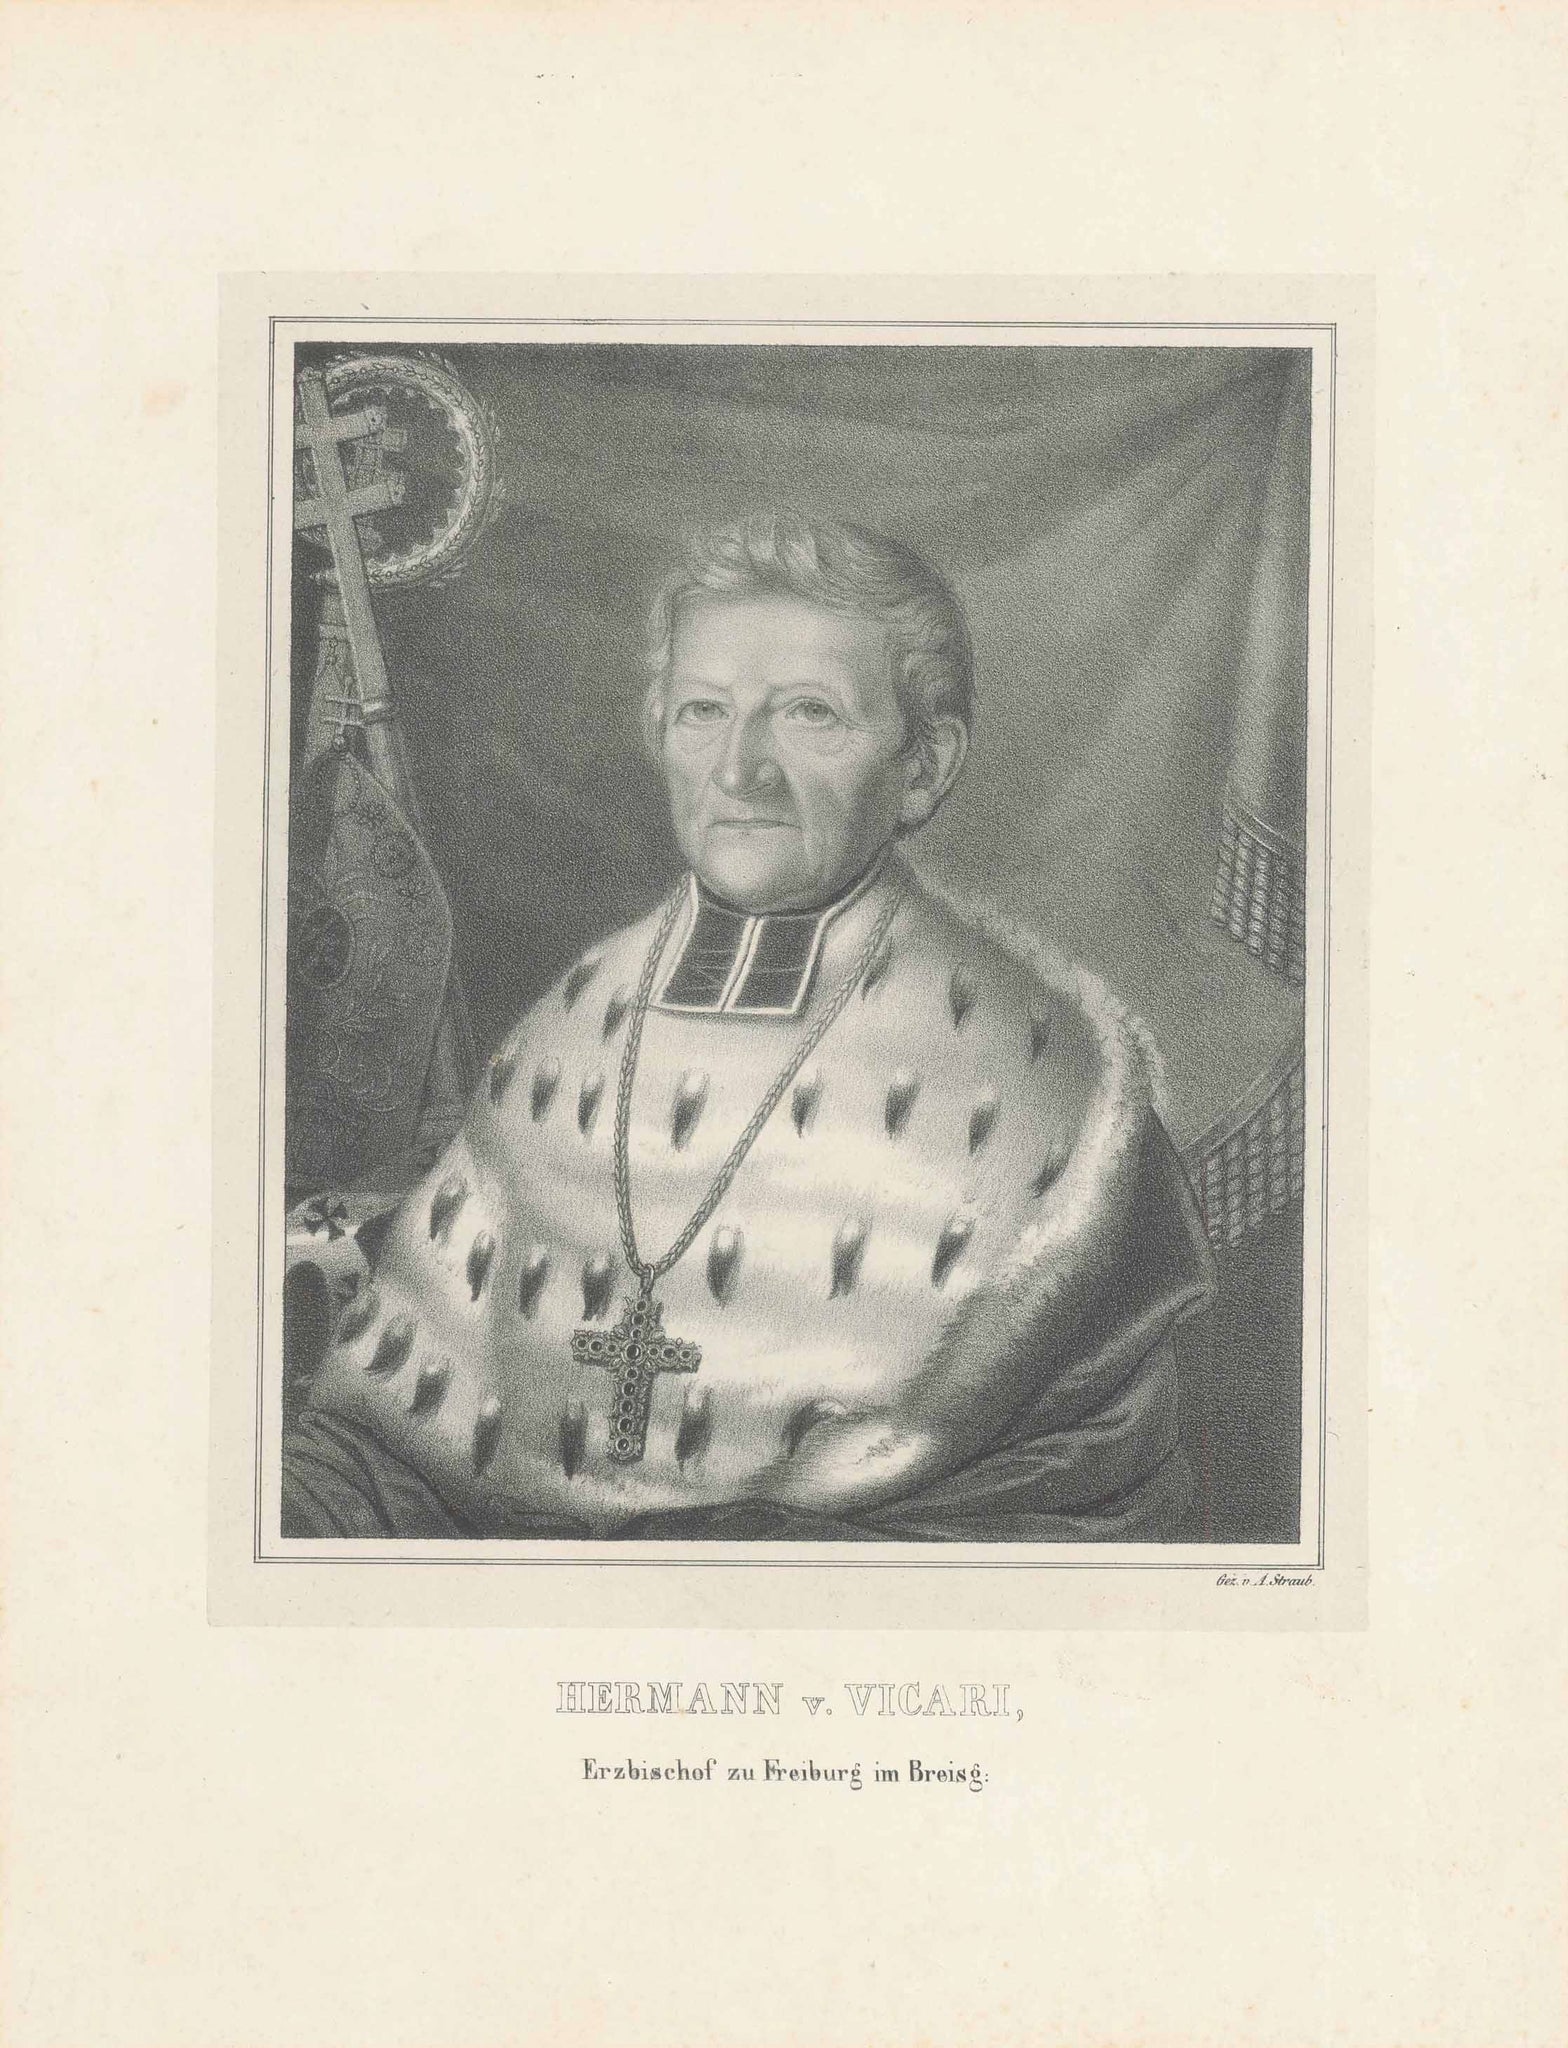 Antique Portrait, "Hermann v. Vicari" "Erzbischof zu Freiburg im Breisgau"  Fine lithograph by A. Straub. Printed on China paper and laid down on backing paper. Published ca 1860.  Vicari (1773-1868) is buried in the Freiburg Cathedral where there is a portrait statue of Vicari.  Original antique print  